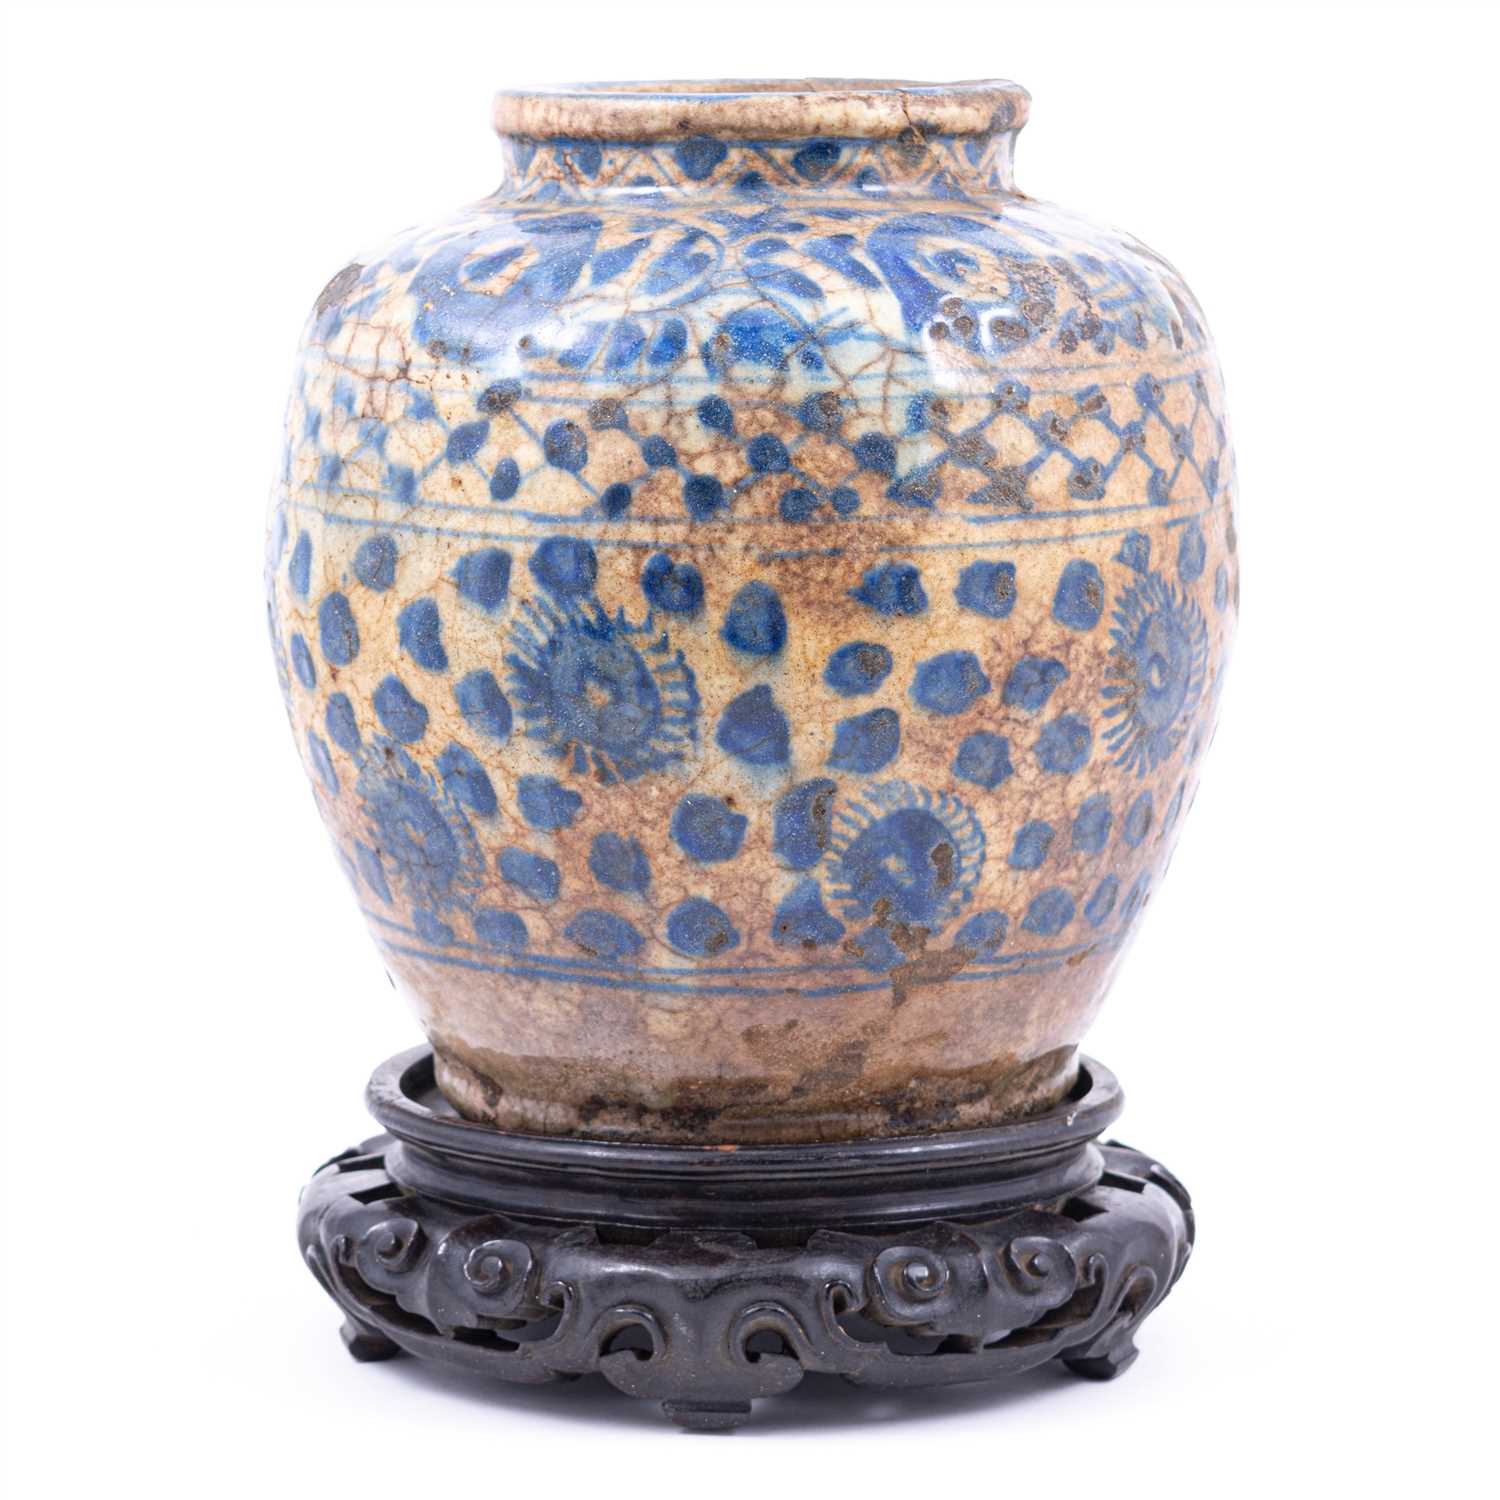 Lot 55 - Chinese blue and white earthenware jar